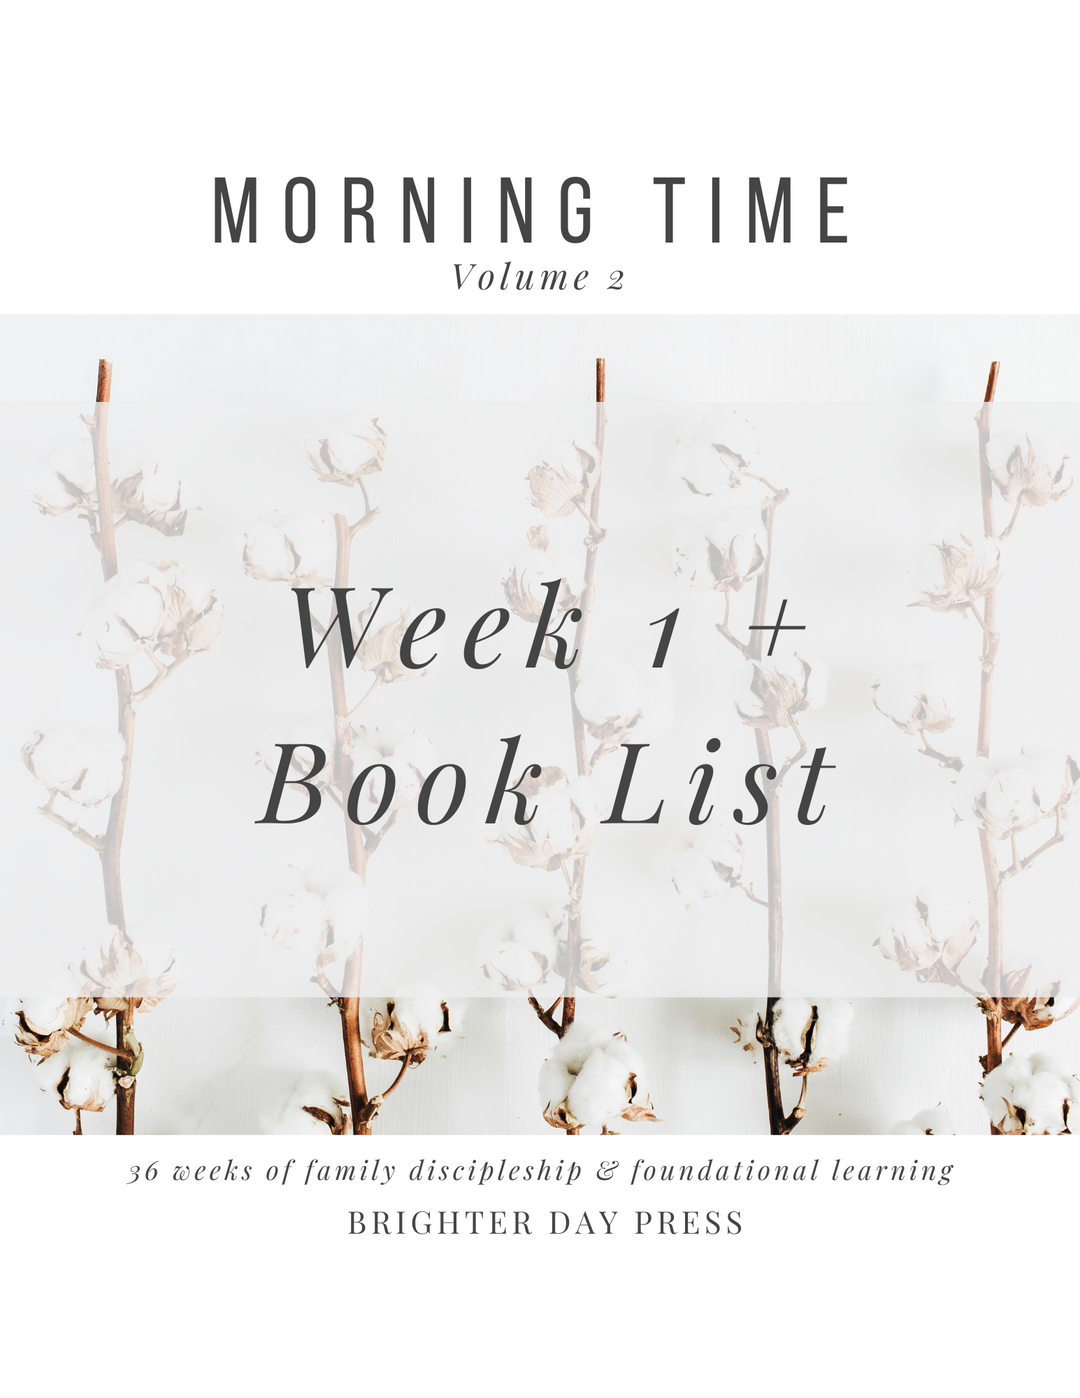 Morning Time, Vol. 2 - Week 1 + Book List (Free Download)